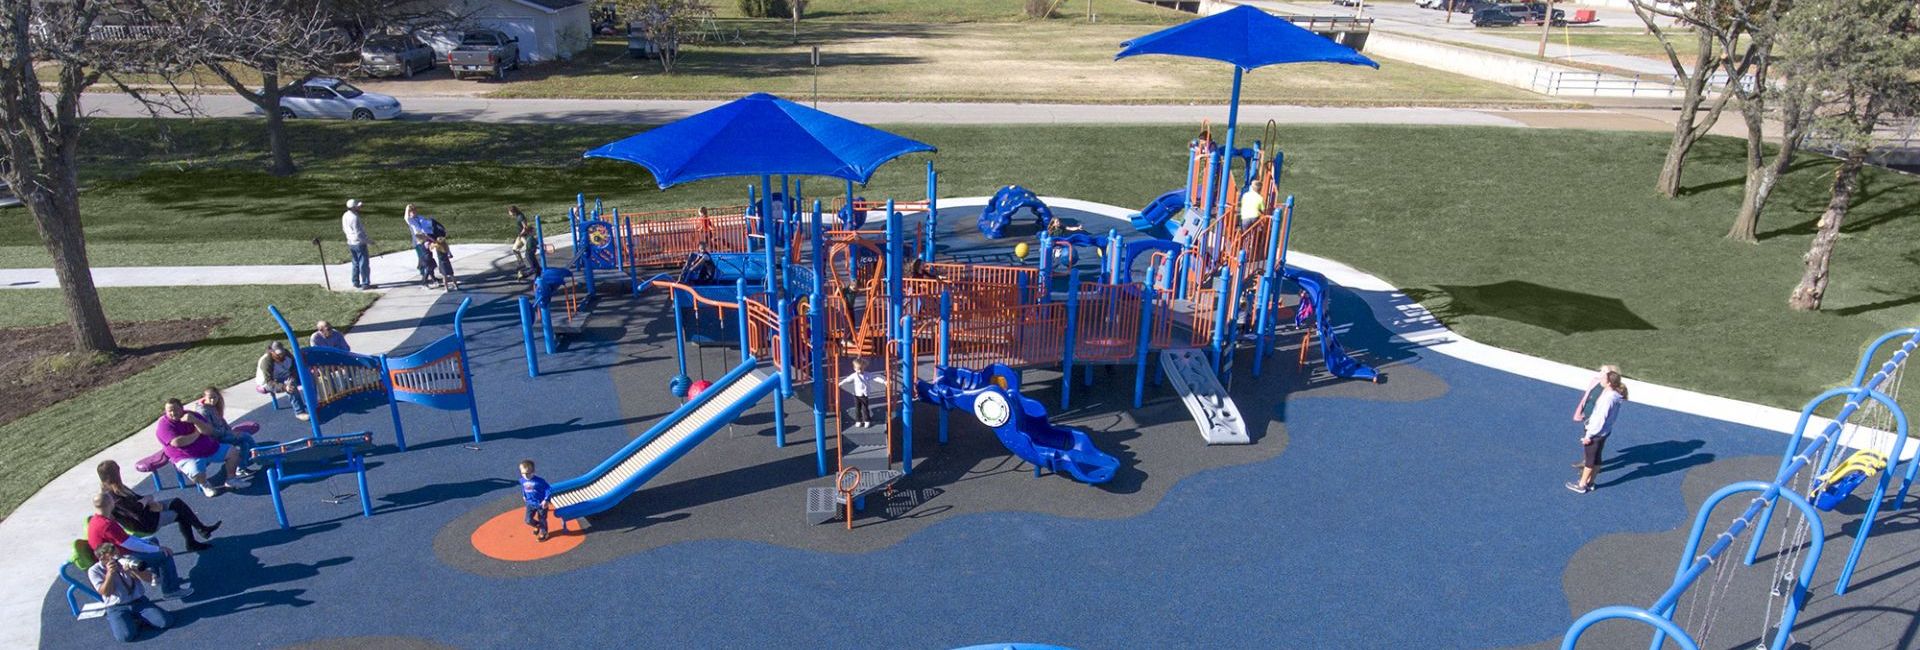 Featured image of aerial shot of blue colored park on gray turf with children playing on it